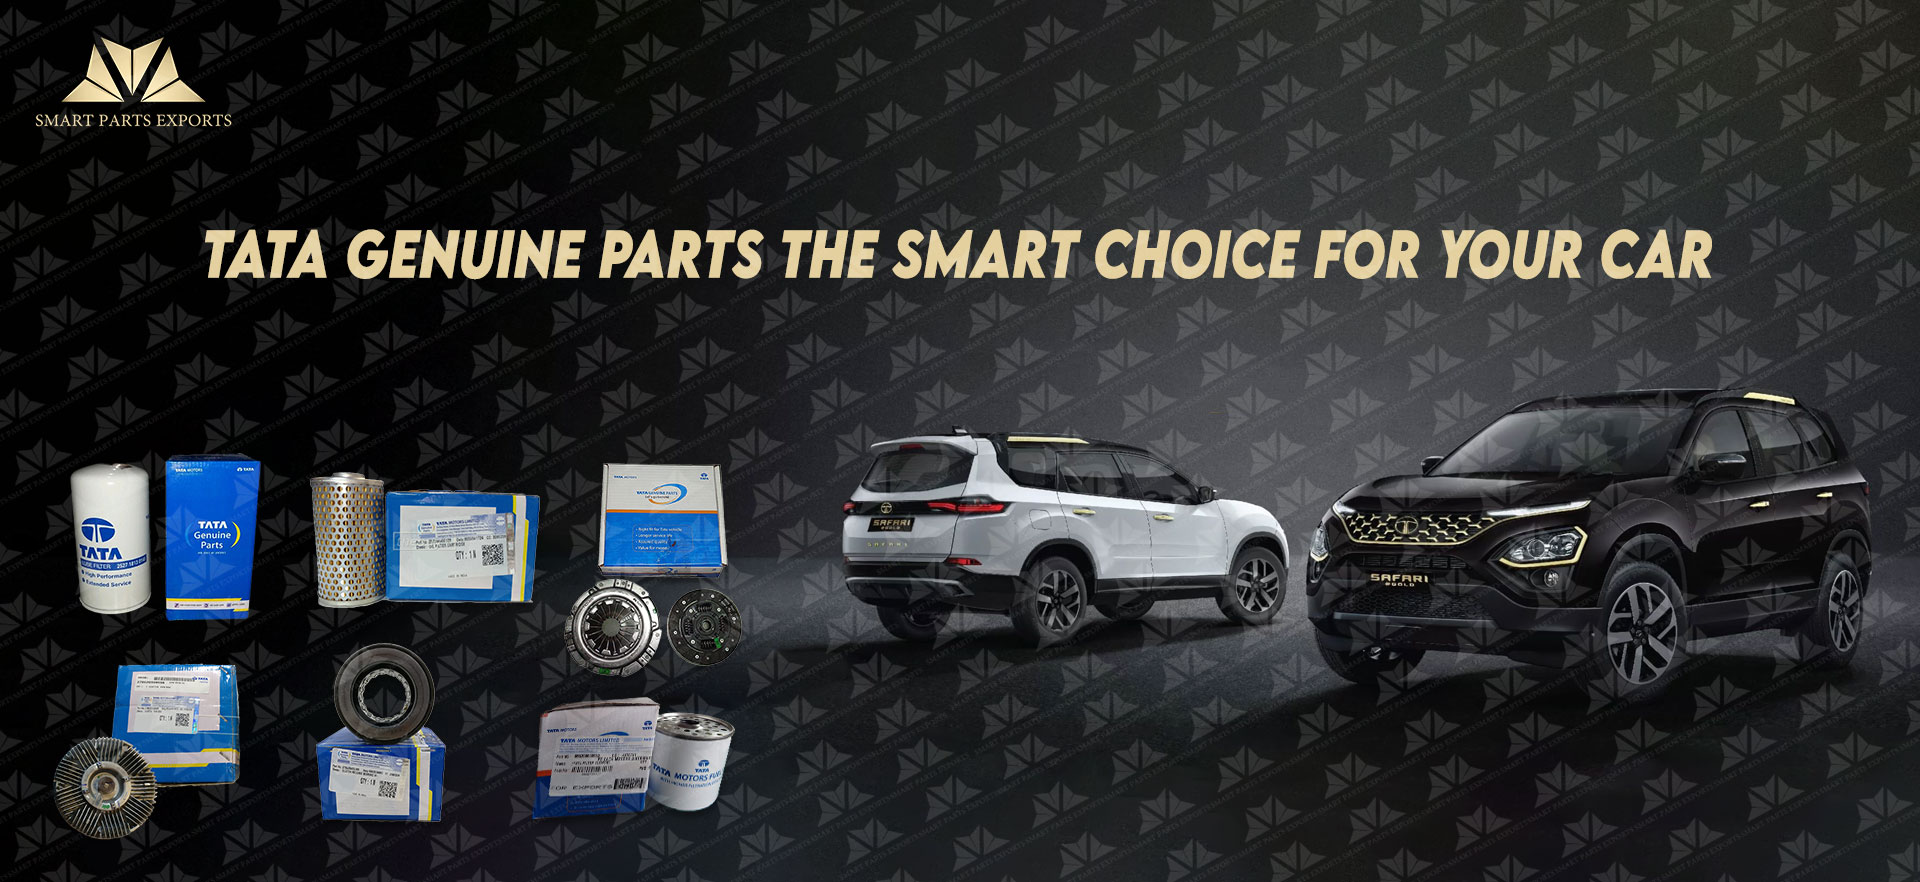 Tata Genuine Parts - The smart choice for your car